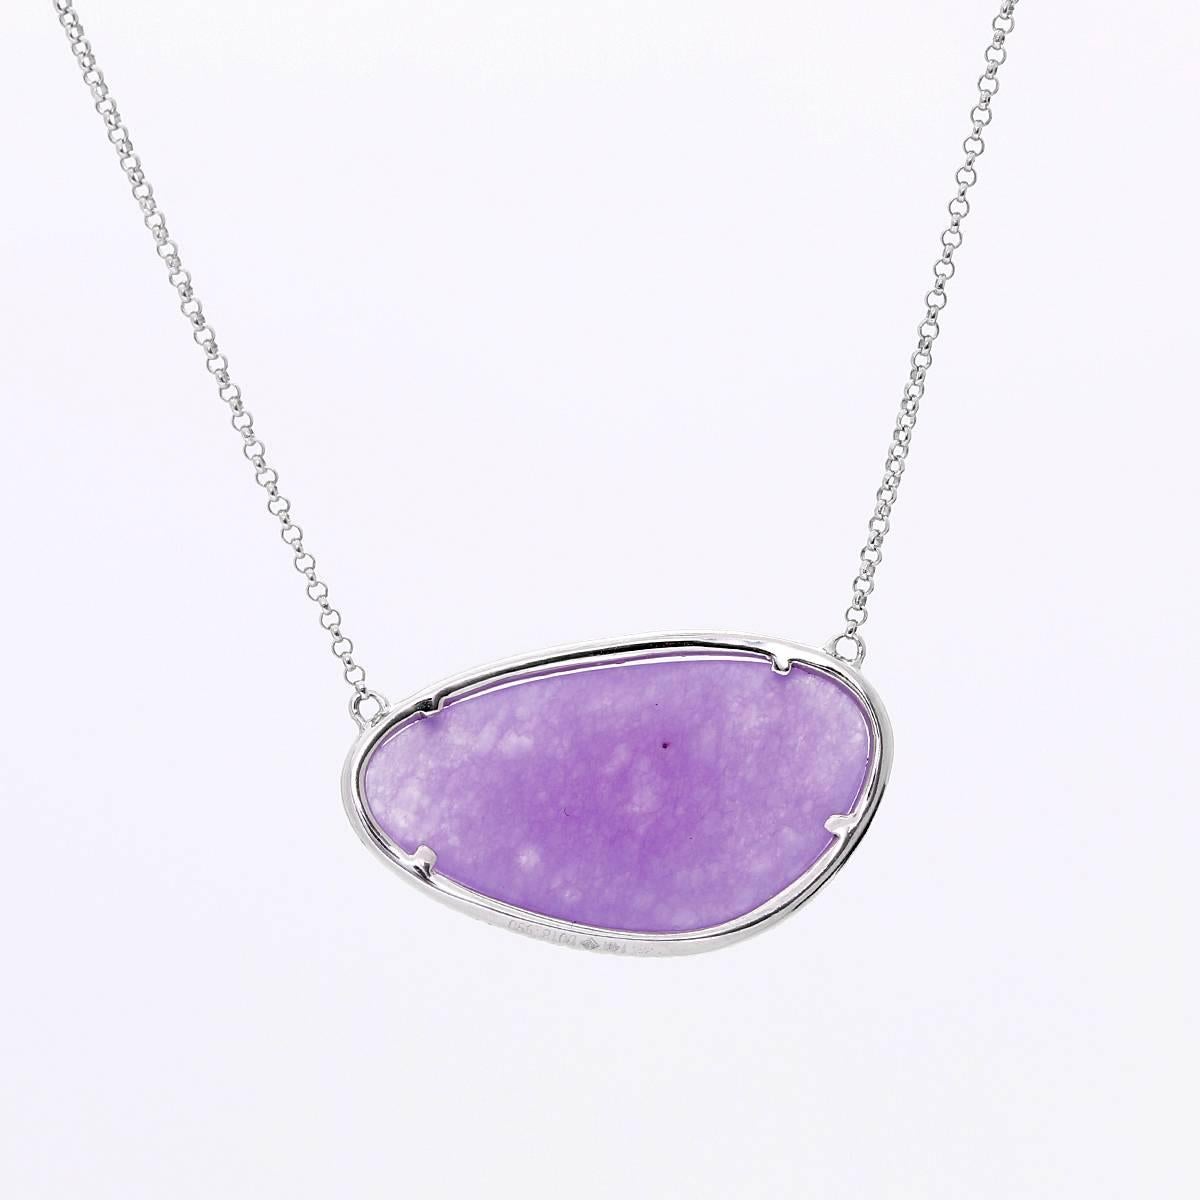 This amazing necklace features a 19.90 carat lavender jade bordered by 0.18 carats of diamonds set in 14k white gold.  The pendant measures apx. 1-inch  in width at the widest and apx. 5/8-inch in length at the longest.  The necklace measures apx.